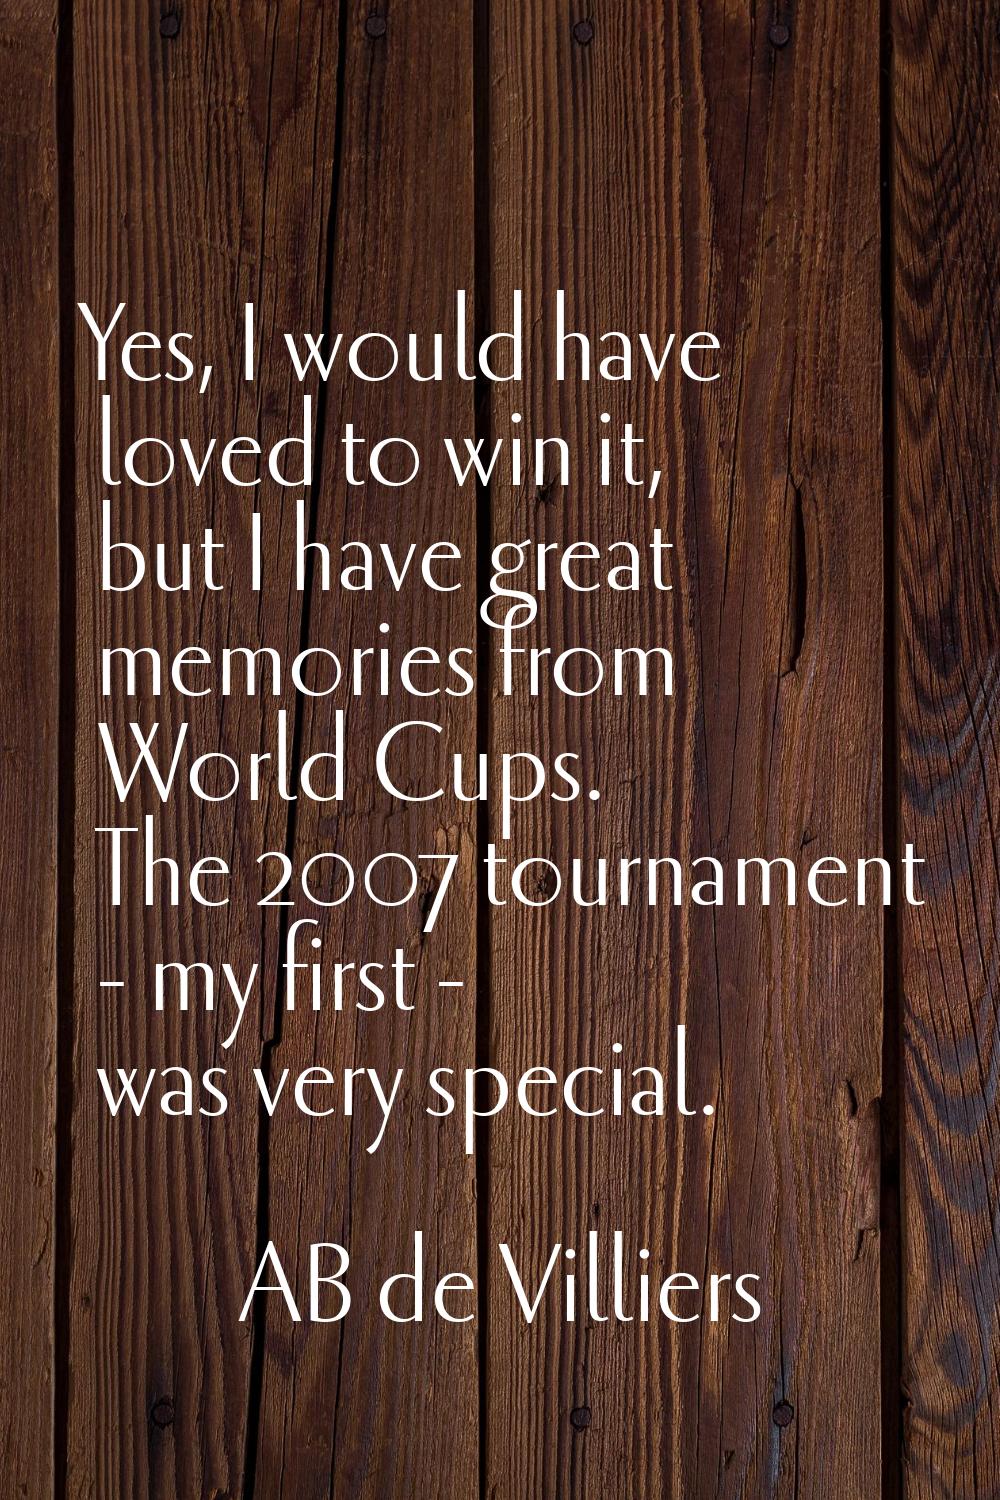 Yes, I would have loved to win it, but I have great memories from World Cups. The 2007 tournament -